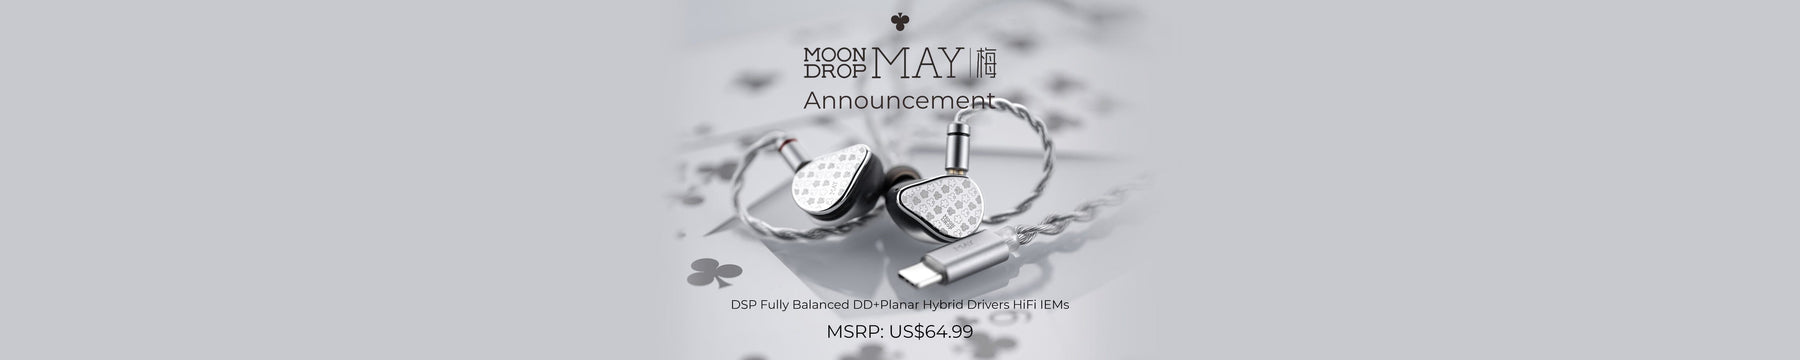 Moondrop May: Brand New Dual-Driver Hybrid Online Interactive DSP IEMs